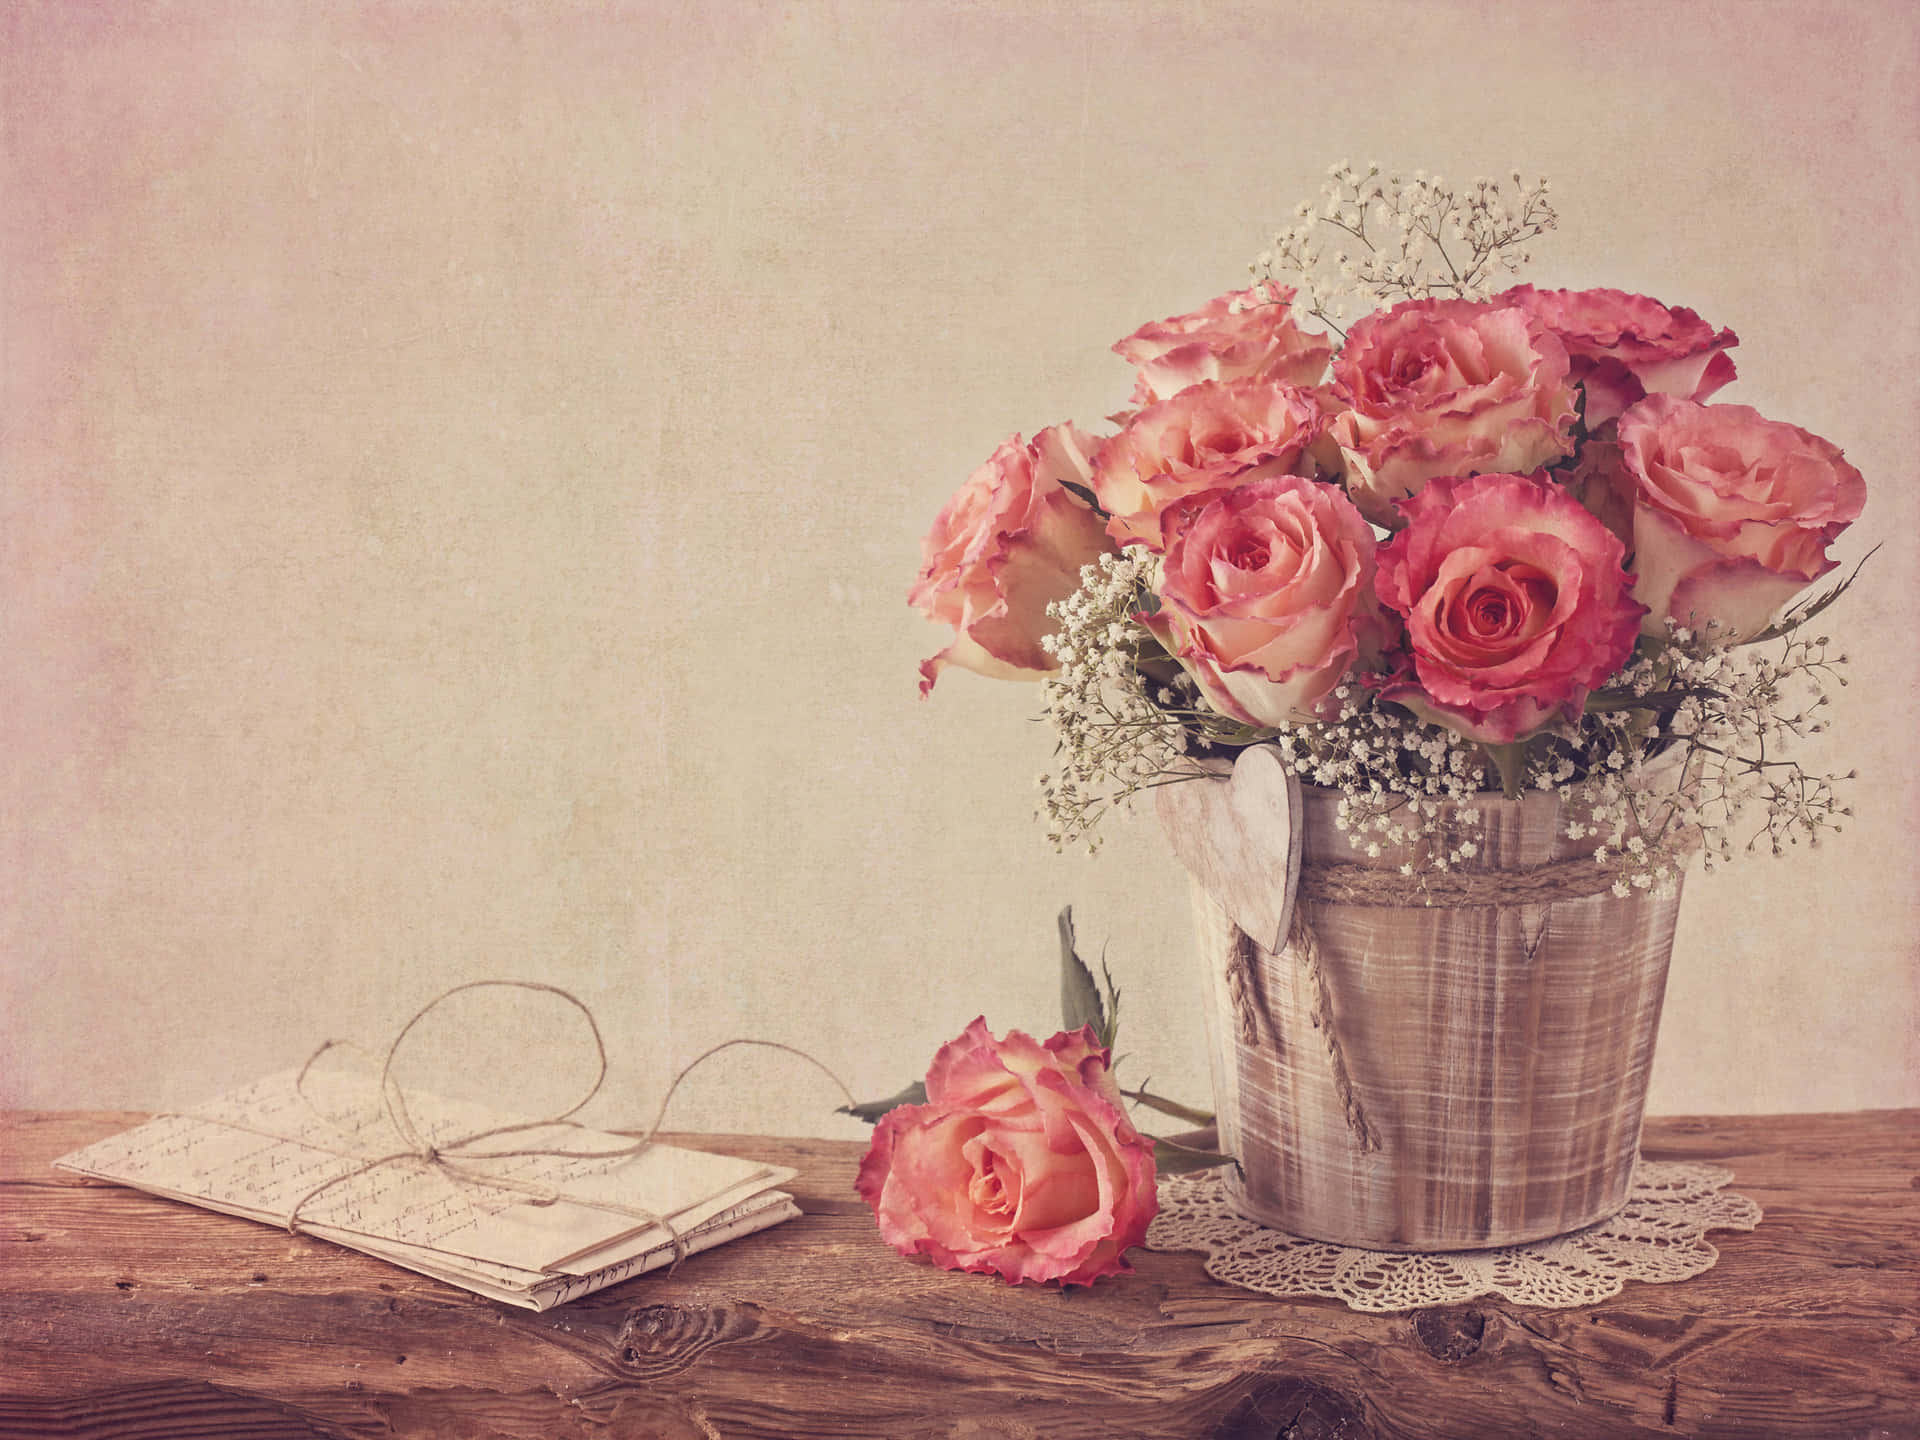 Vintage Roses In A Vase On A Wooden Table Wallpaper